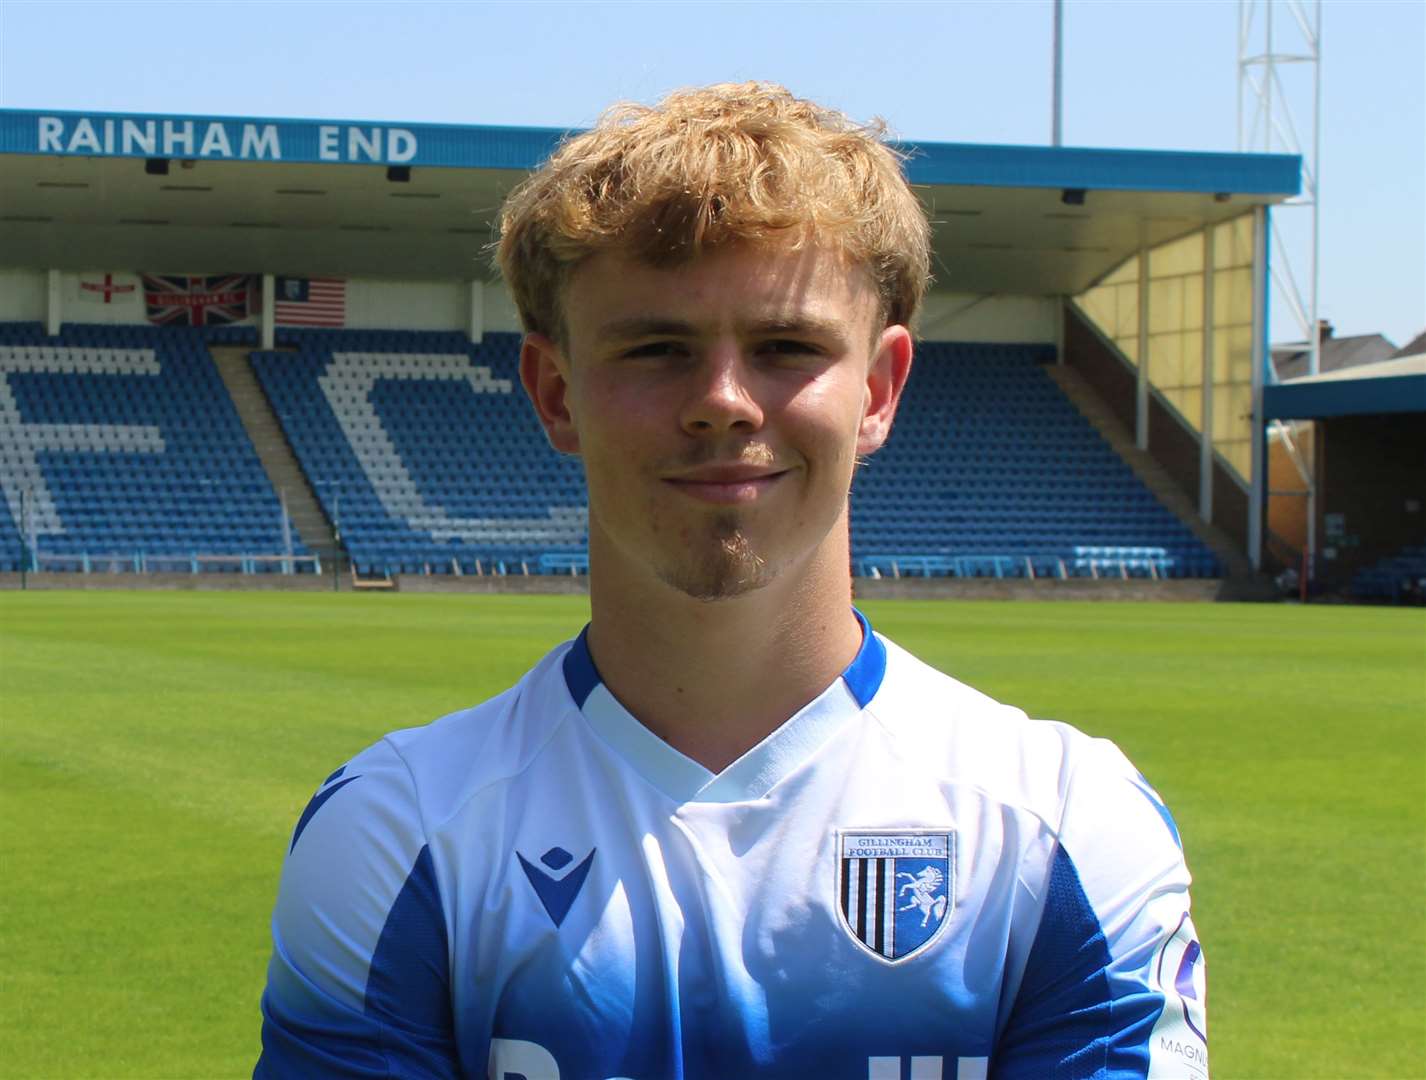 Gillingham’s Australian teenager Matty Macarthur has signed on loan for Dartford and scored on his debut